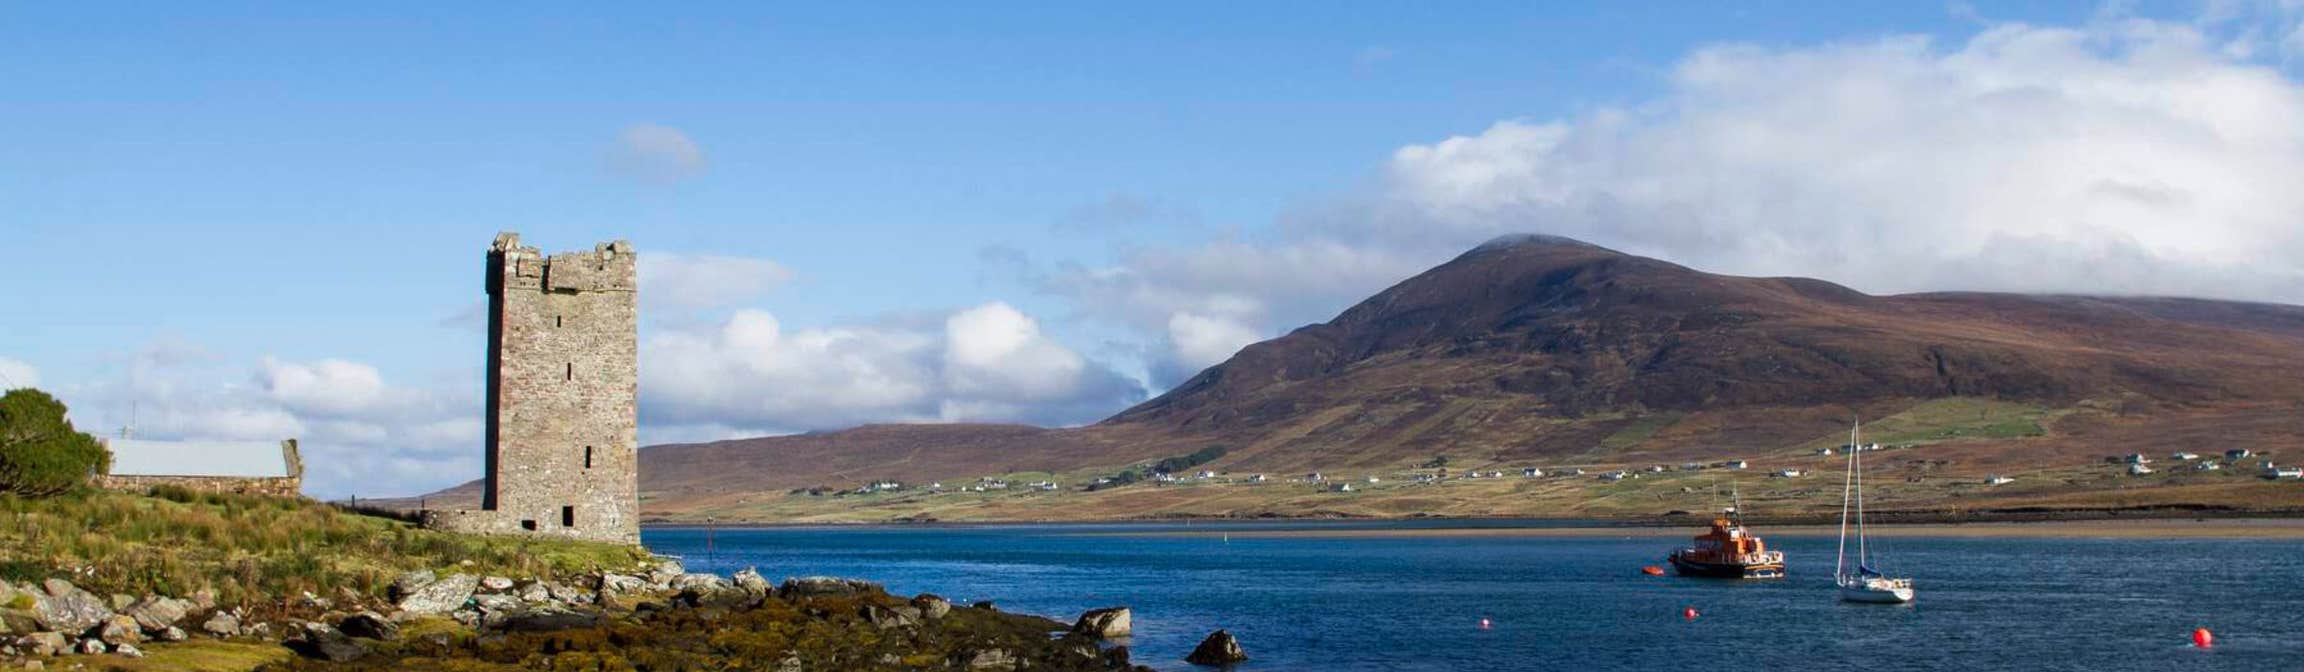 Image of An Chéibh Bheag and Granuaile's Tower, Achill Island, County Mayo